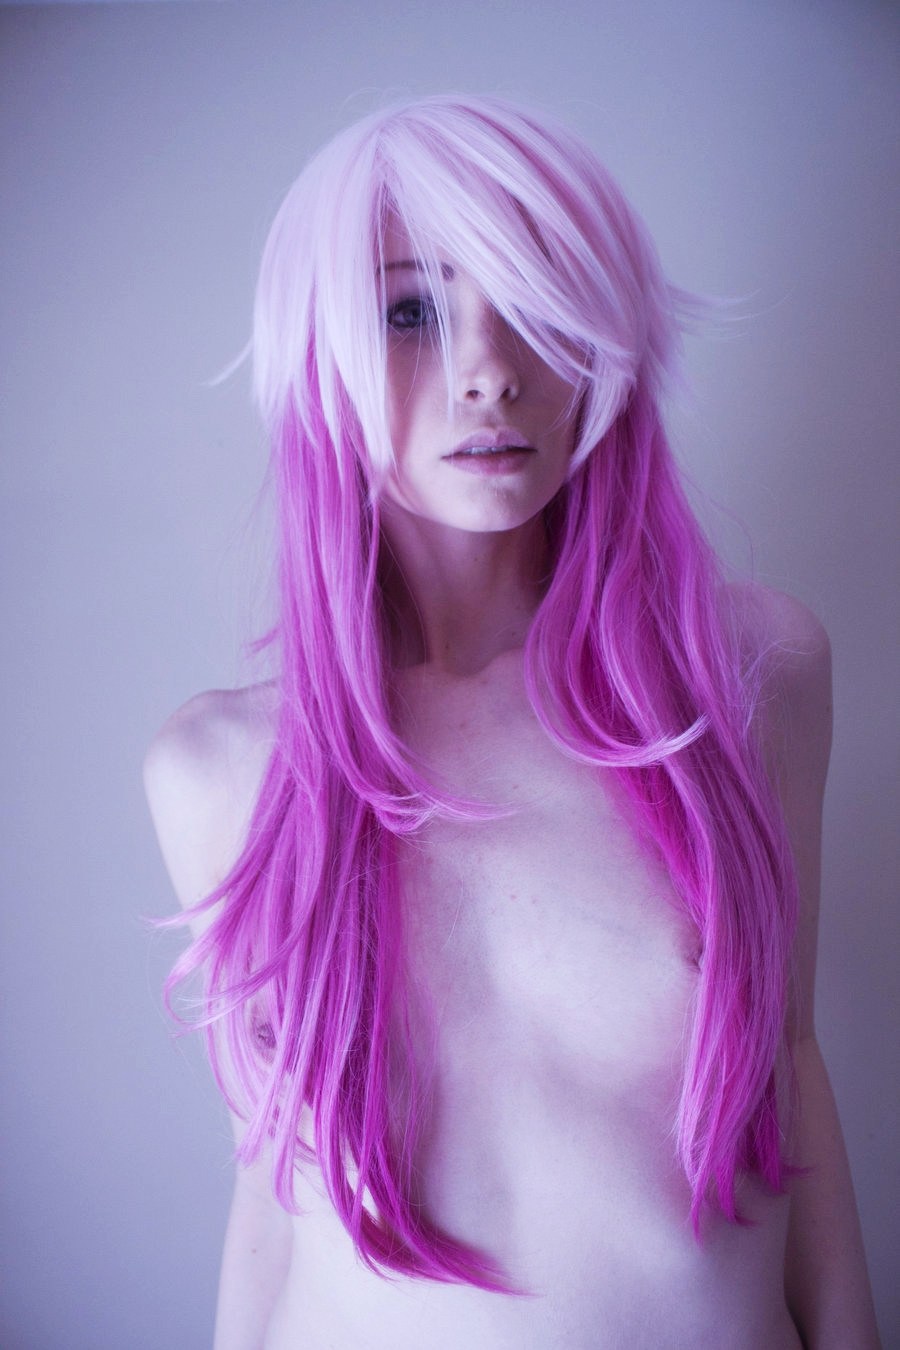 Nude girls dyed hair pics - Real Naked Girls